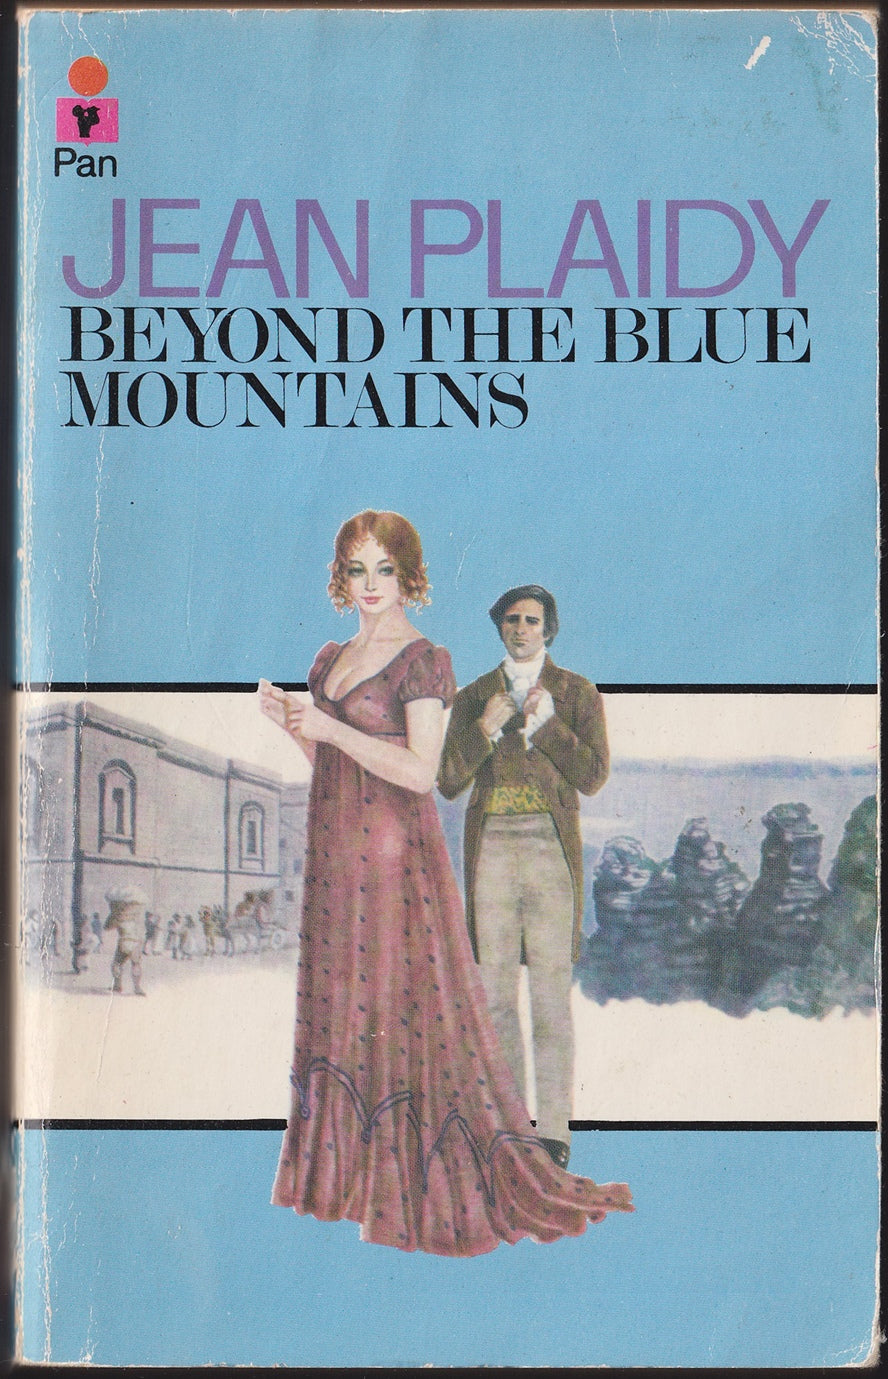 Beyond the Blue Mountains